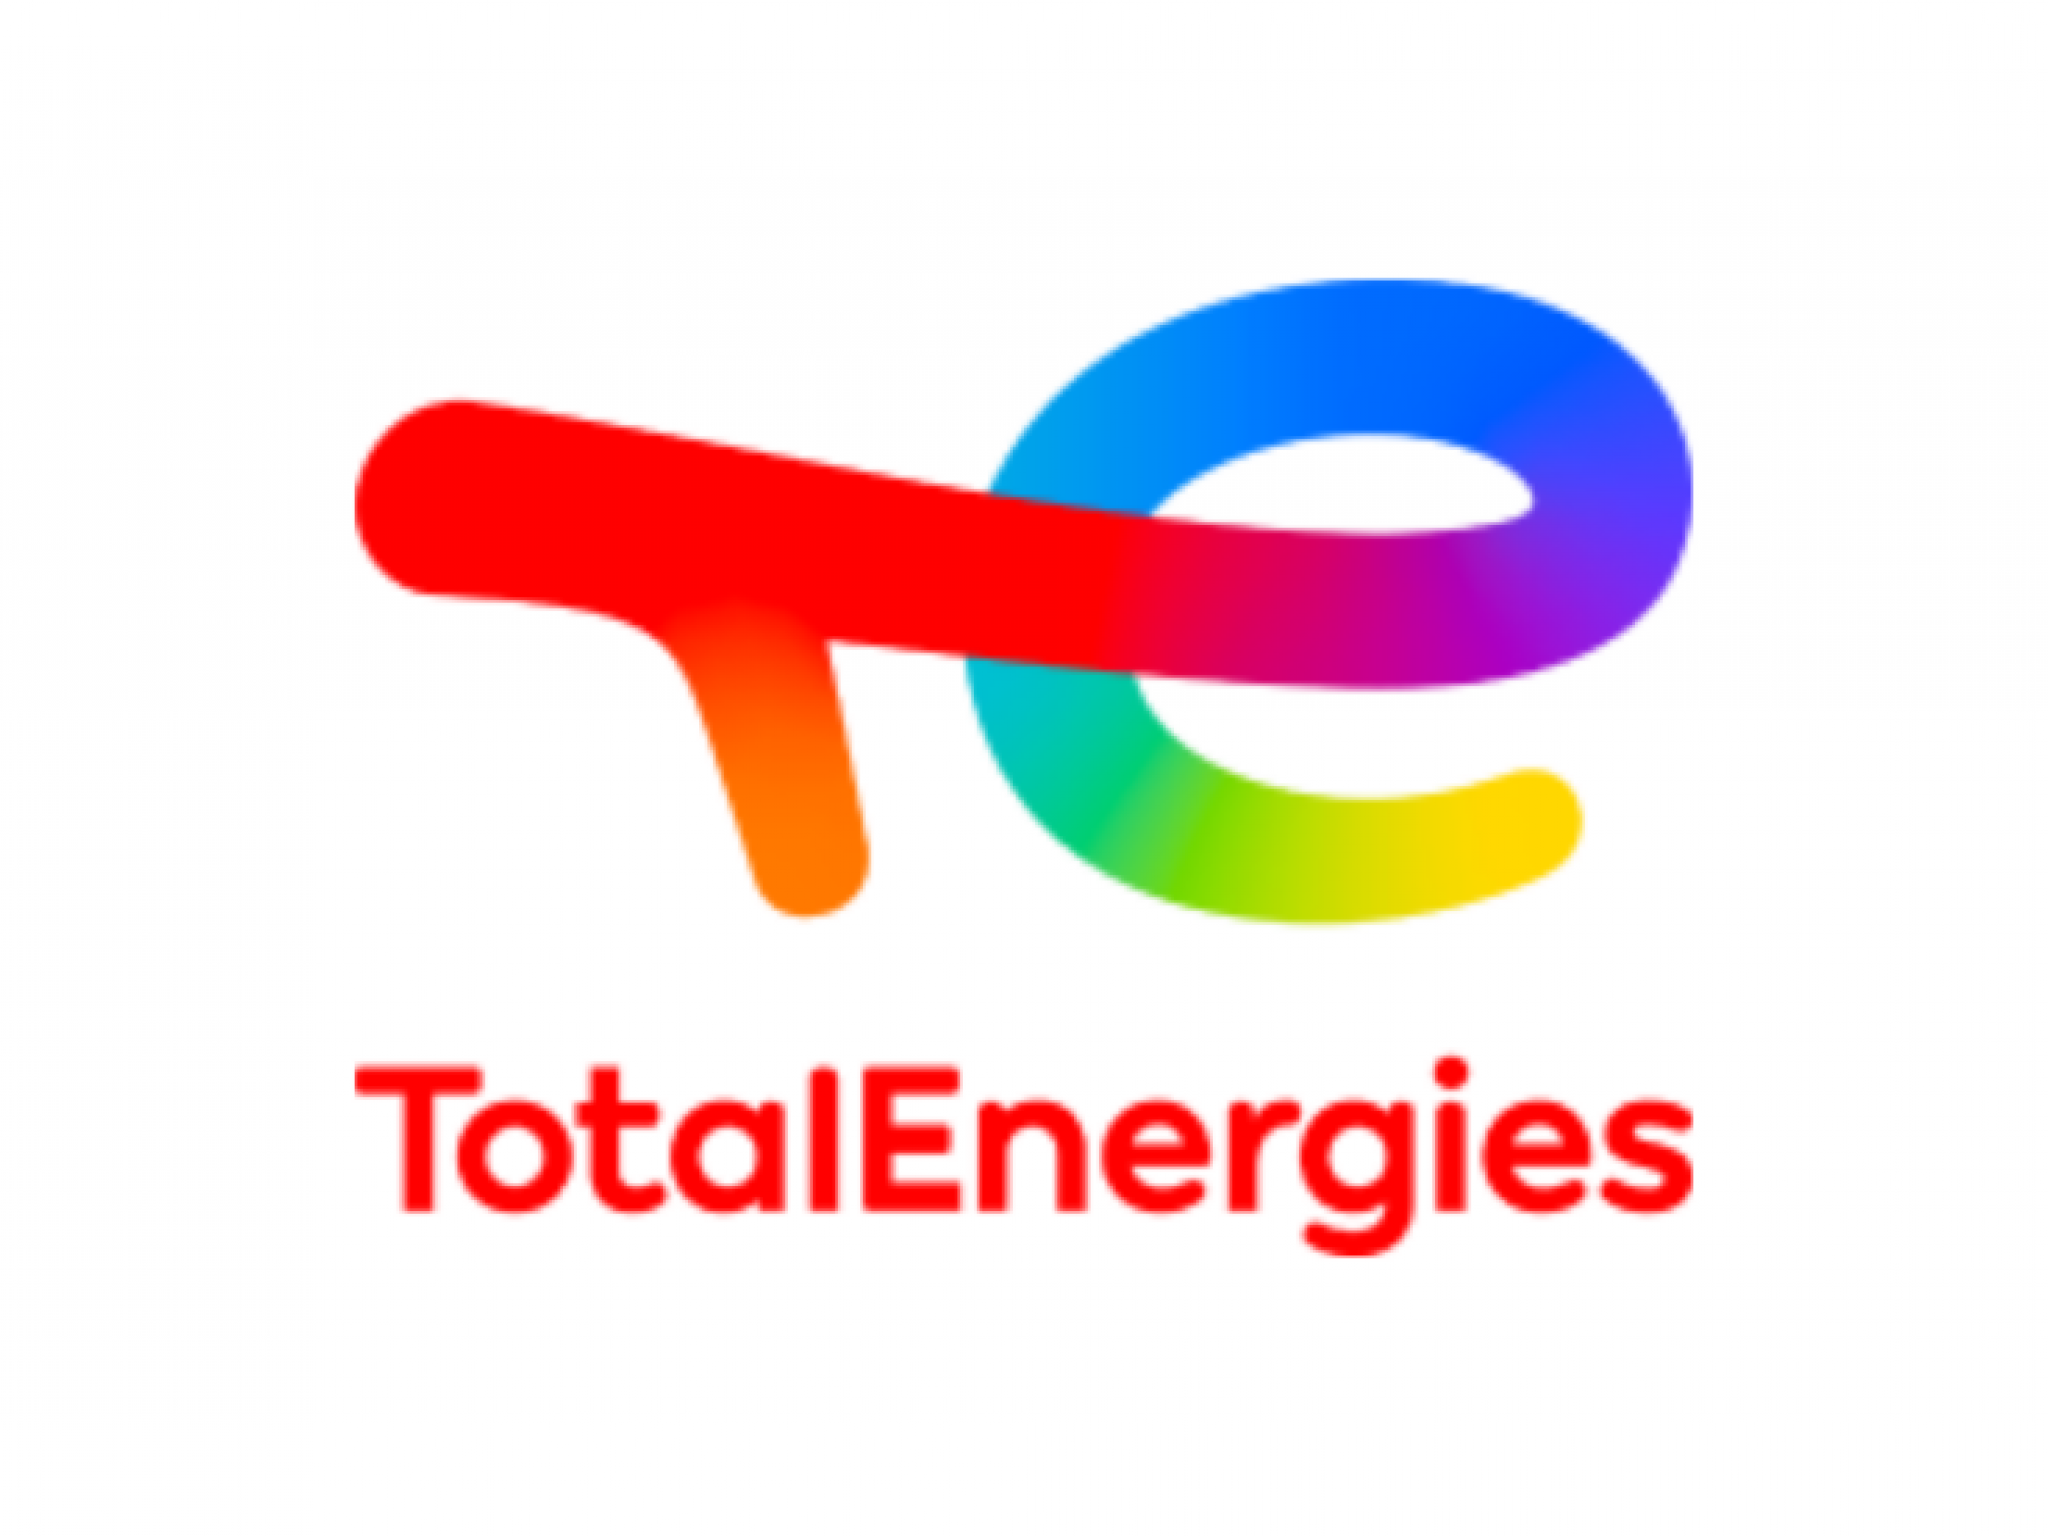  sun-power-for-businesses-totalenergies-discloses-massive-solar-deals-globally 